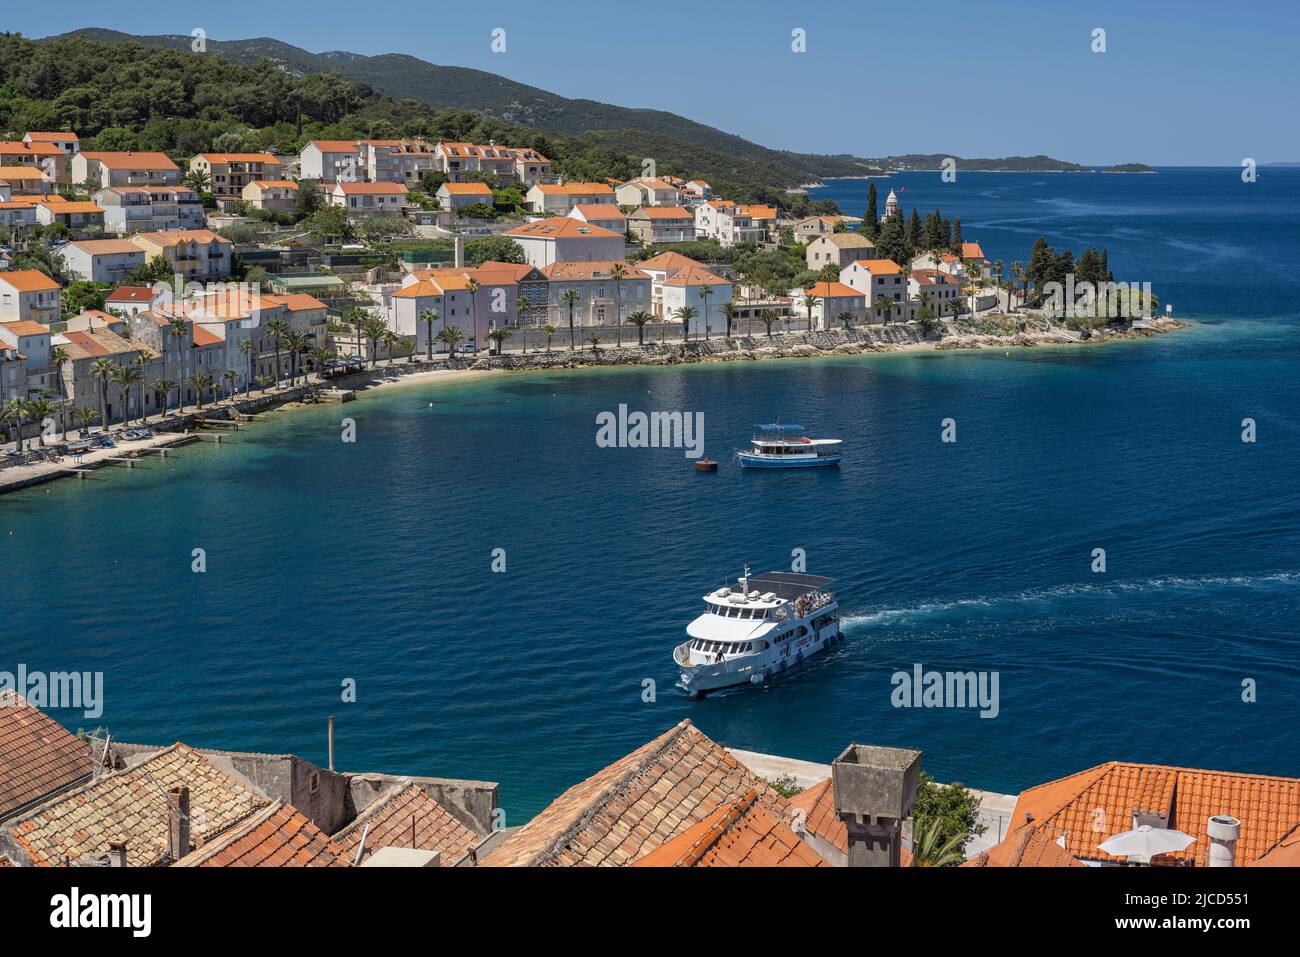 Excursion Boat approaching West Harbor, Korcula Island, with Houses of the New Town Behind Stock Photo